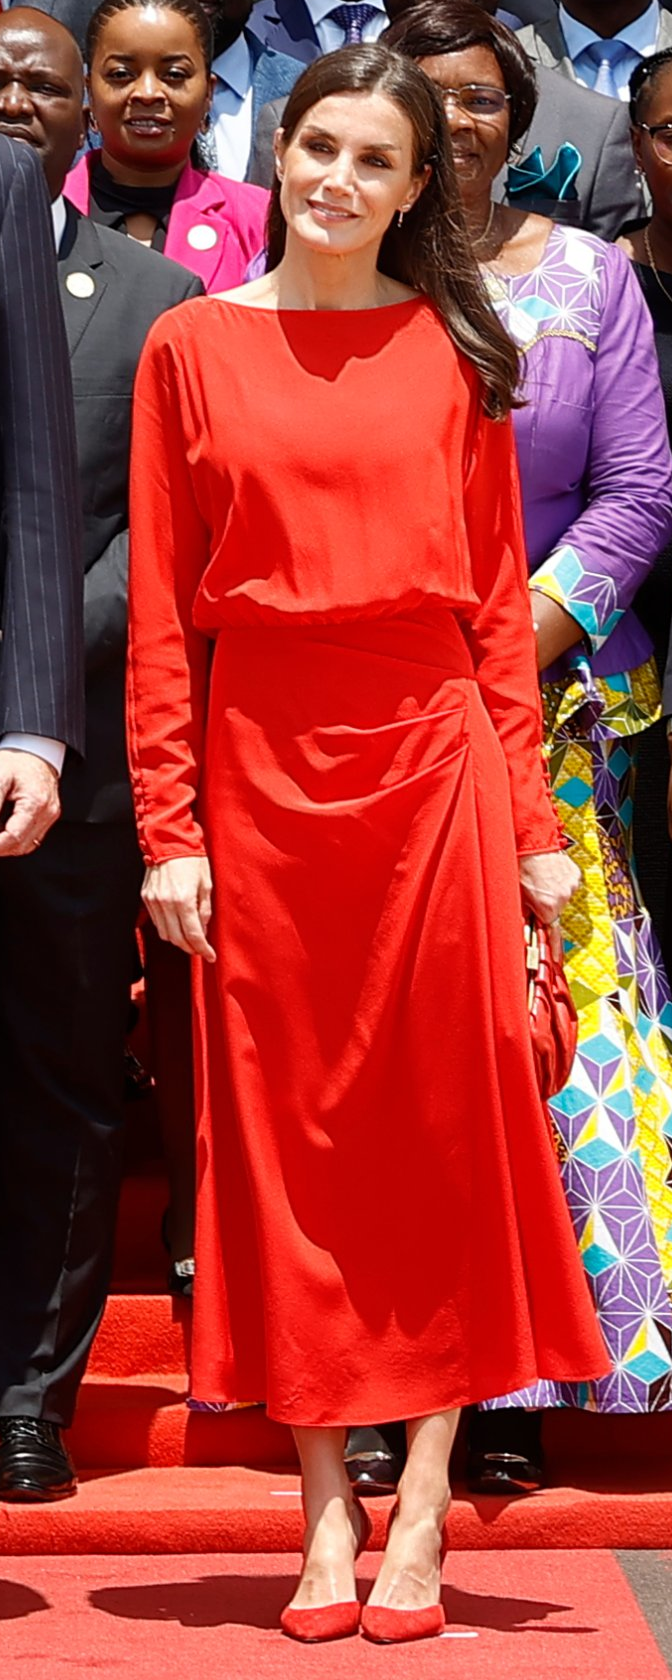 Malababa 'Gracia' Clutch in Red as carried by Queen Letizia